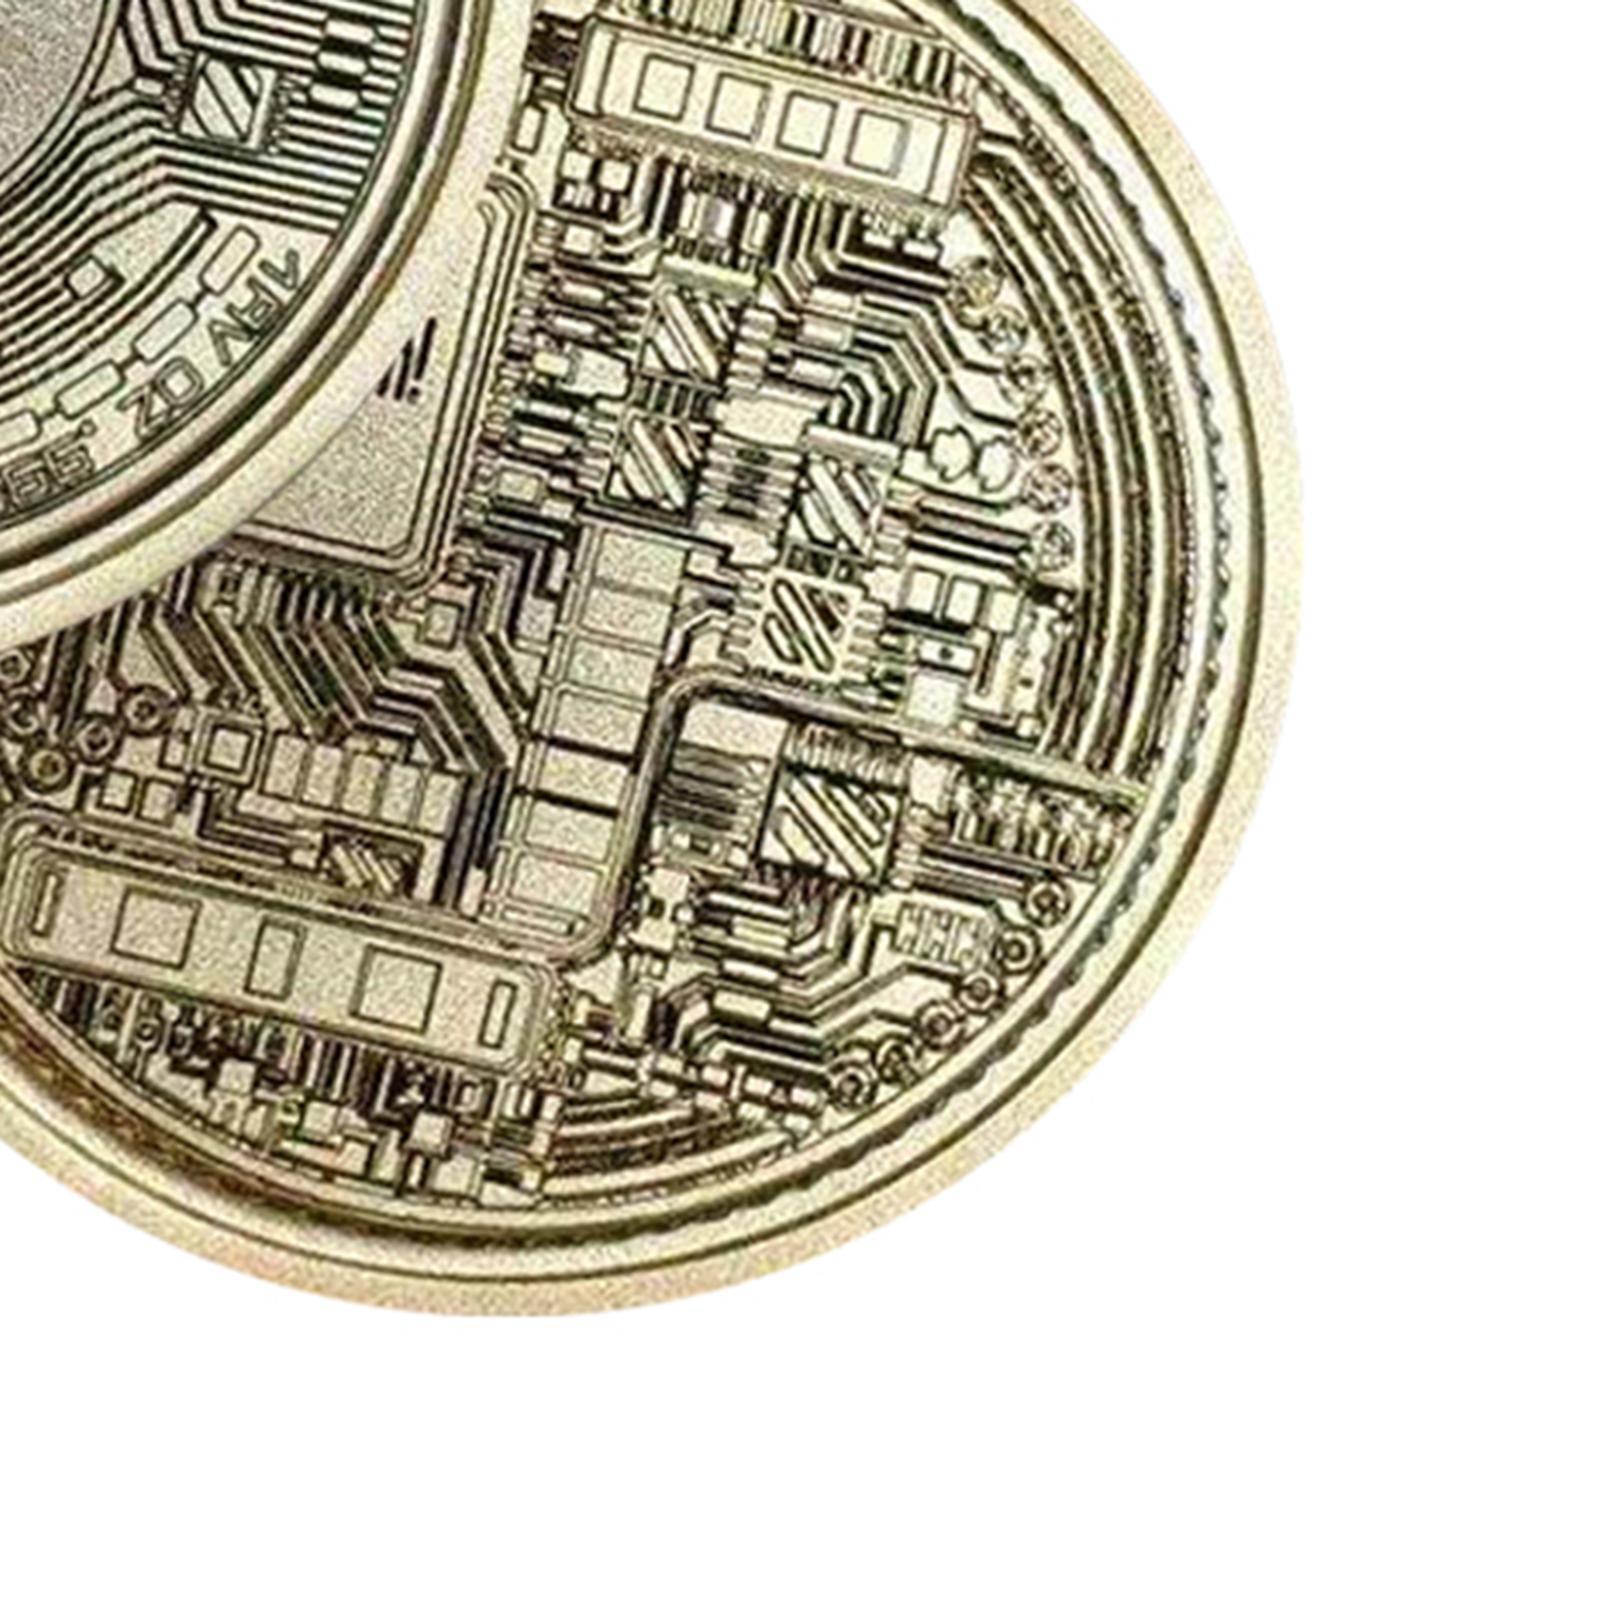 Alloy Dogecoin Blockchain Cryptocurrency 2021 Collectors Doge Coin Token, Collection